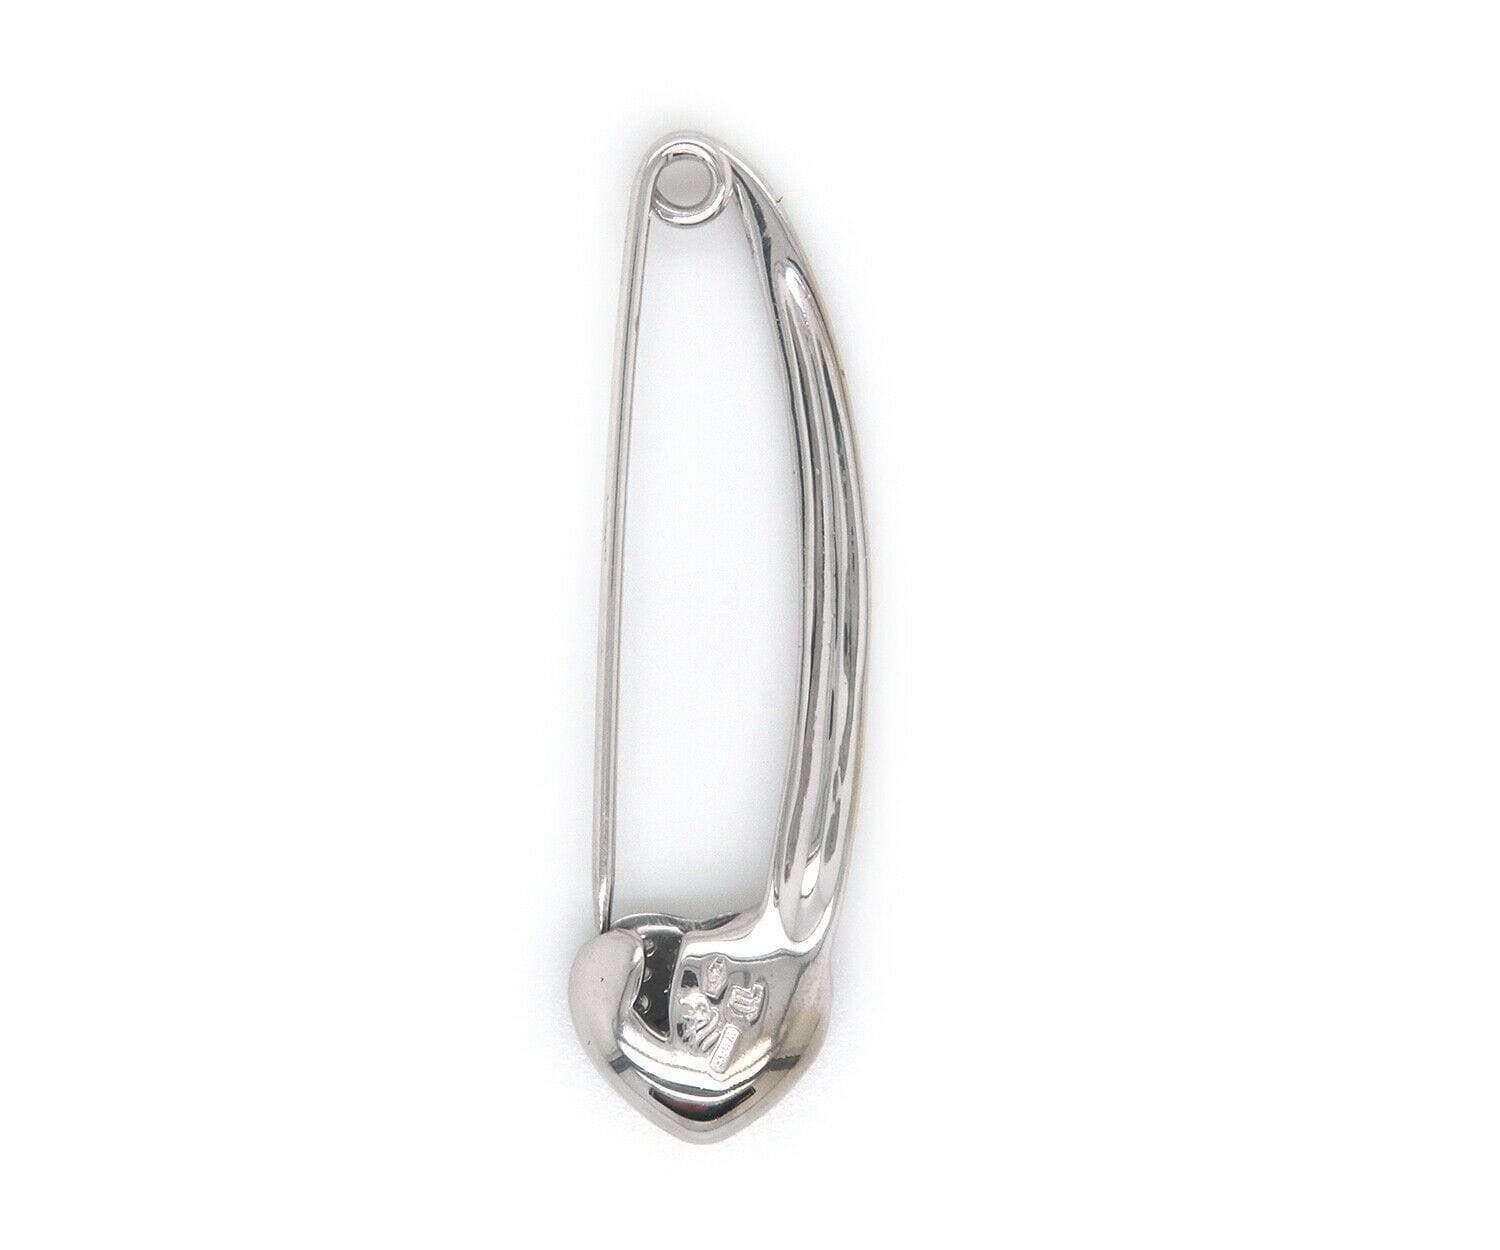 Aaron Basha 0.30 CTW Diamond Heart Safety Pin Brooch in 18K

Aaron Basha Diamond Heart Safety Pin
18K White Gold
Diamond Weight: Approx. 0.30 CTW
Brooch Size: Approx. 1 5/8”L X 1/2”W
Weight: Approx. 4.2 Grams
Stamped: AB, 750

Condition:
Offered for